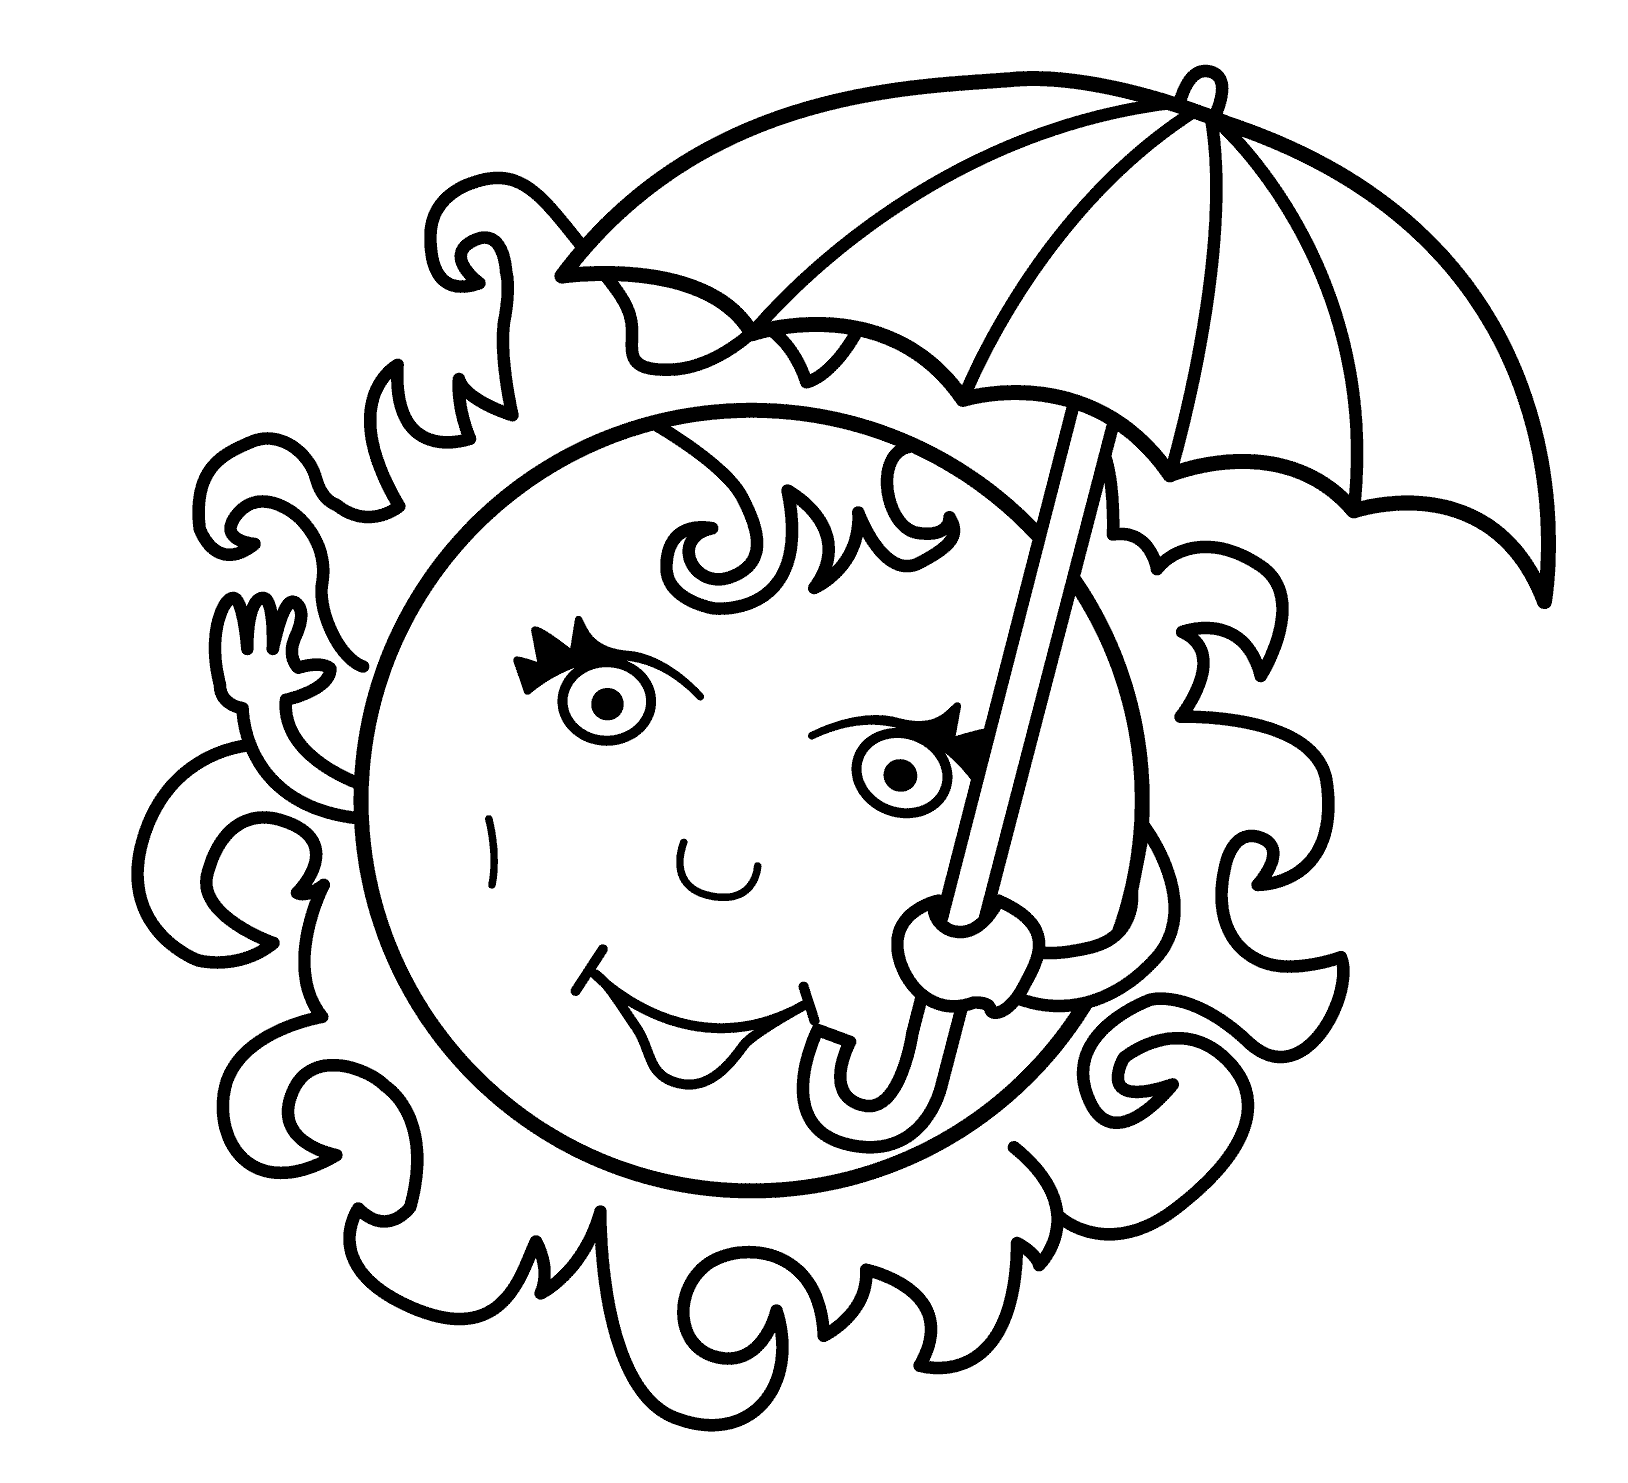 free coloring pages for spring and summer